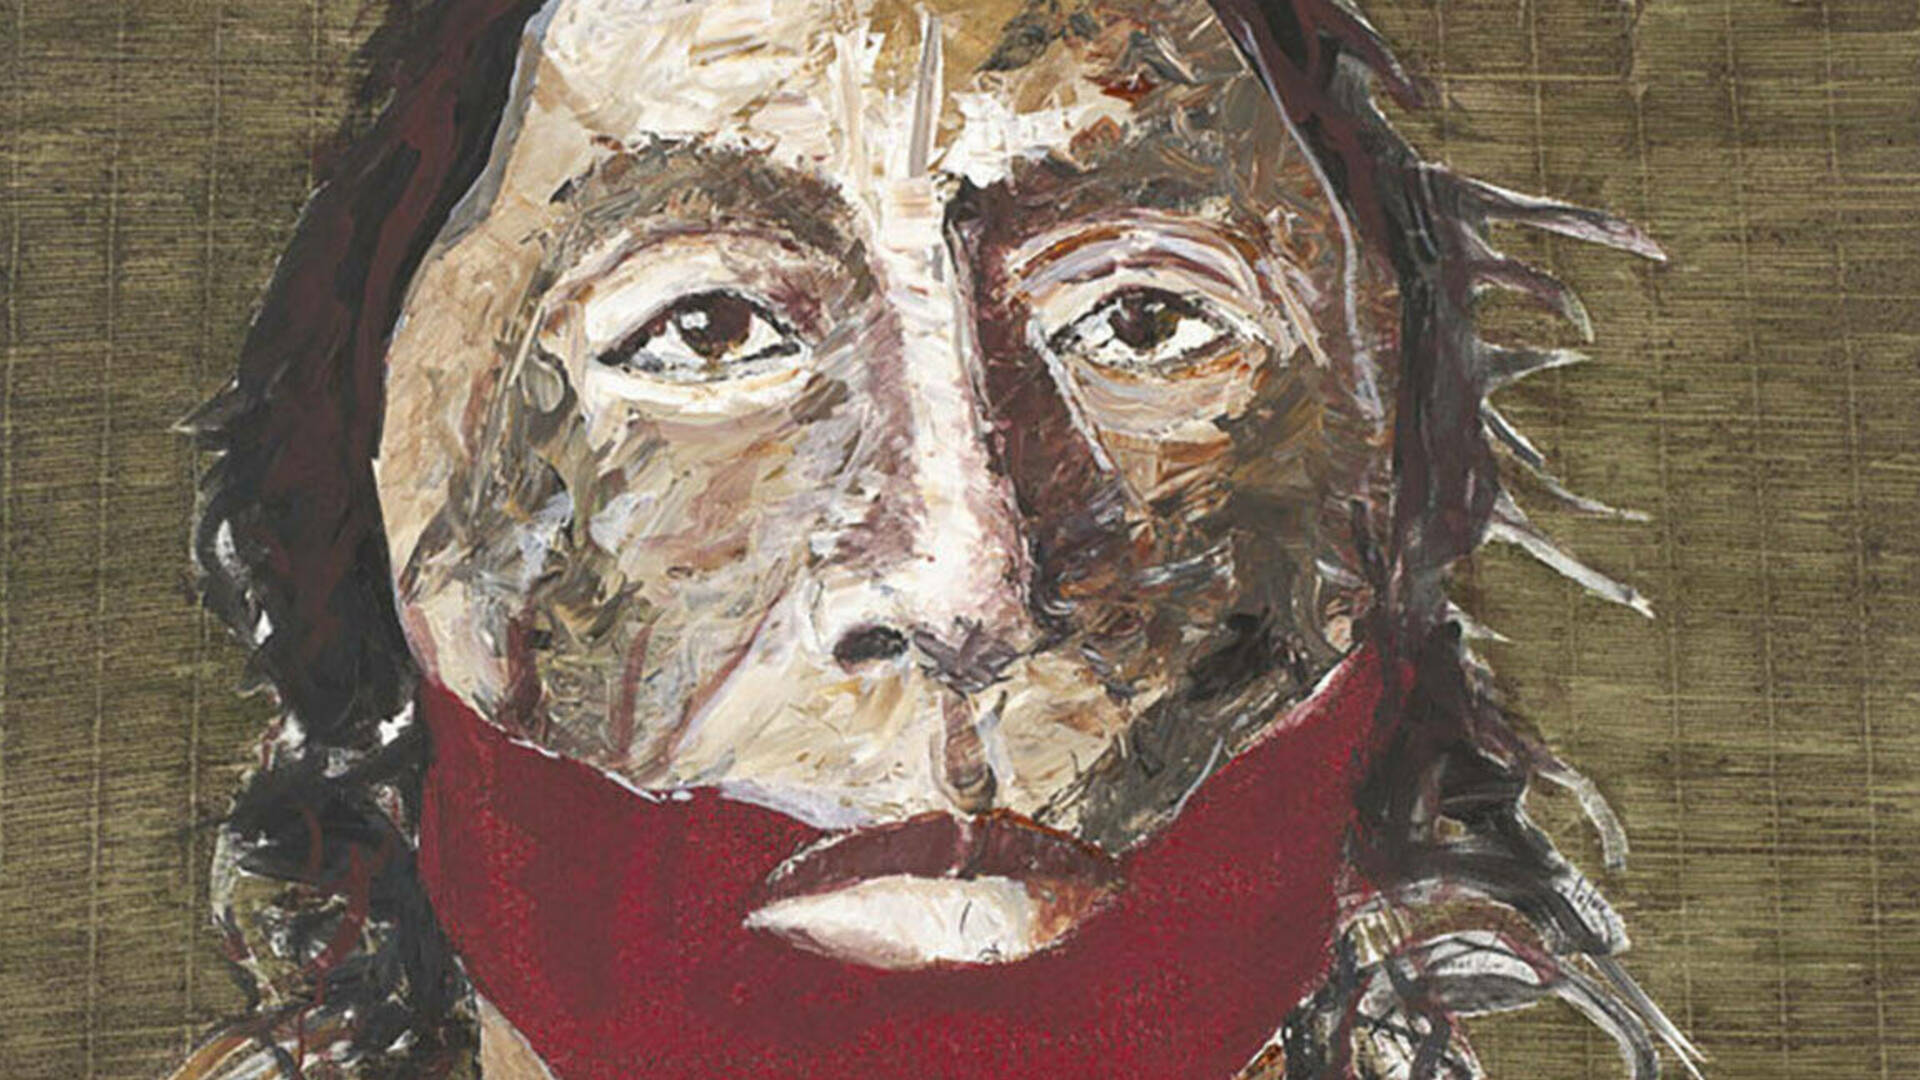 Tomás Lasansky (American, b. 1957), Painted Face, 2008, acrylic on canvas, 65 x 53 inches.